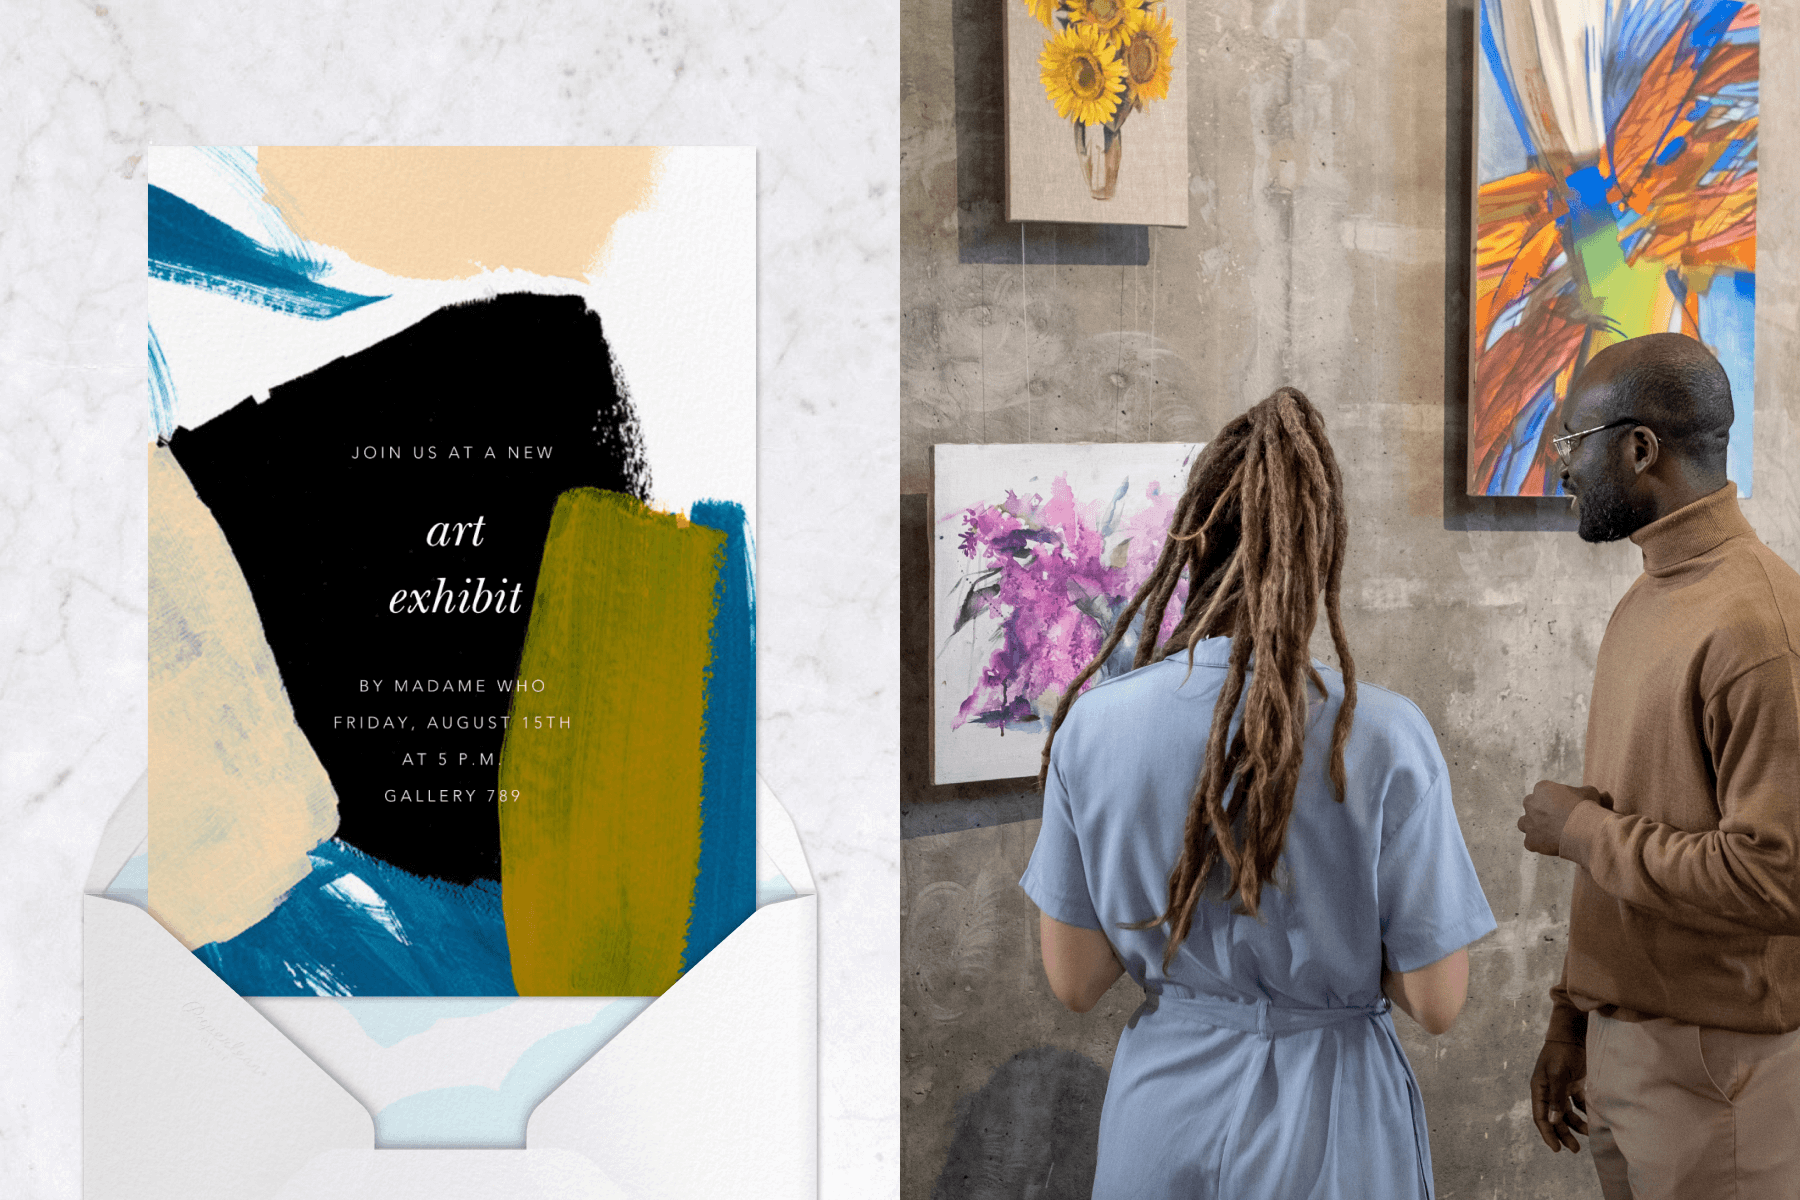 left: An art exhibit invitation with broad paint brush strokes in black, peach, blue, and olive. Right: Two people shown from behind adire three pieces of painted artwork on a concrete wall.